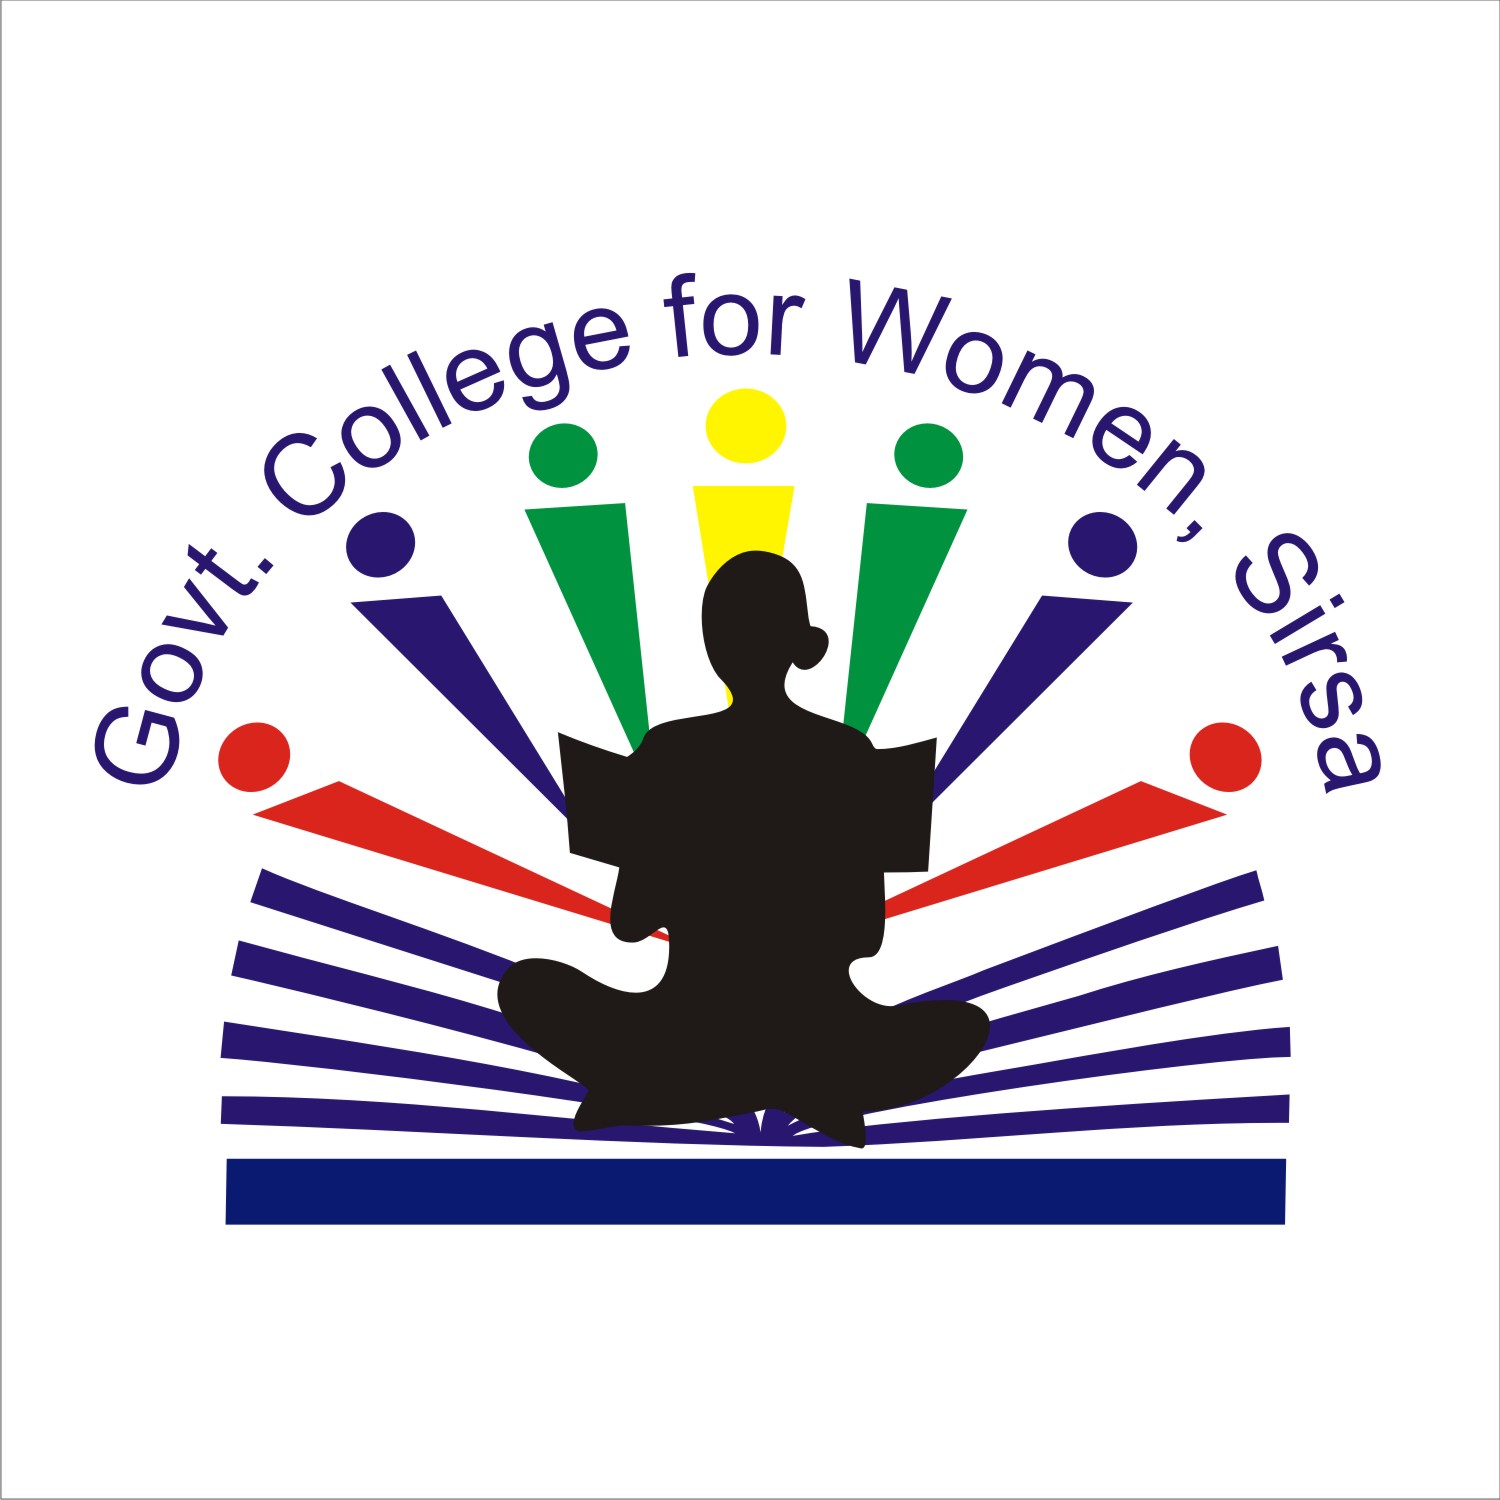 Government College For Women|Schools|Education